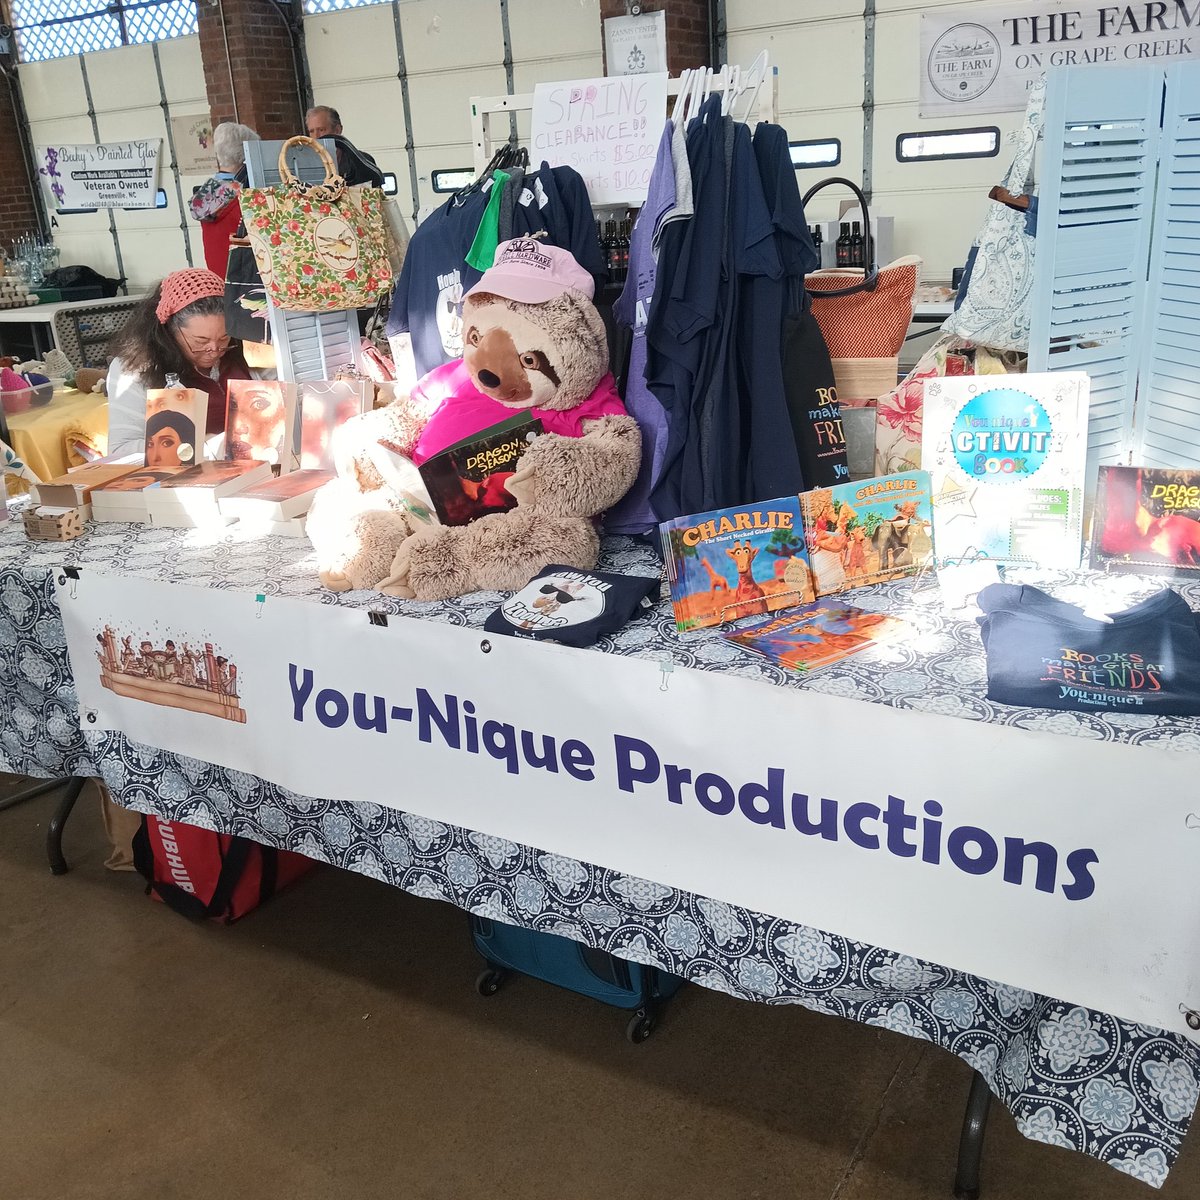 Come join us on this bright sunny spring day at the New Bern Farmers Market. 🌞#youniqueproductions #books #Newbern #nbfm #childrensbooks